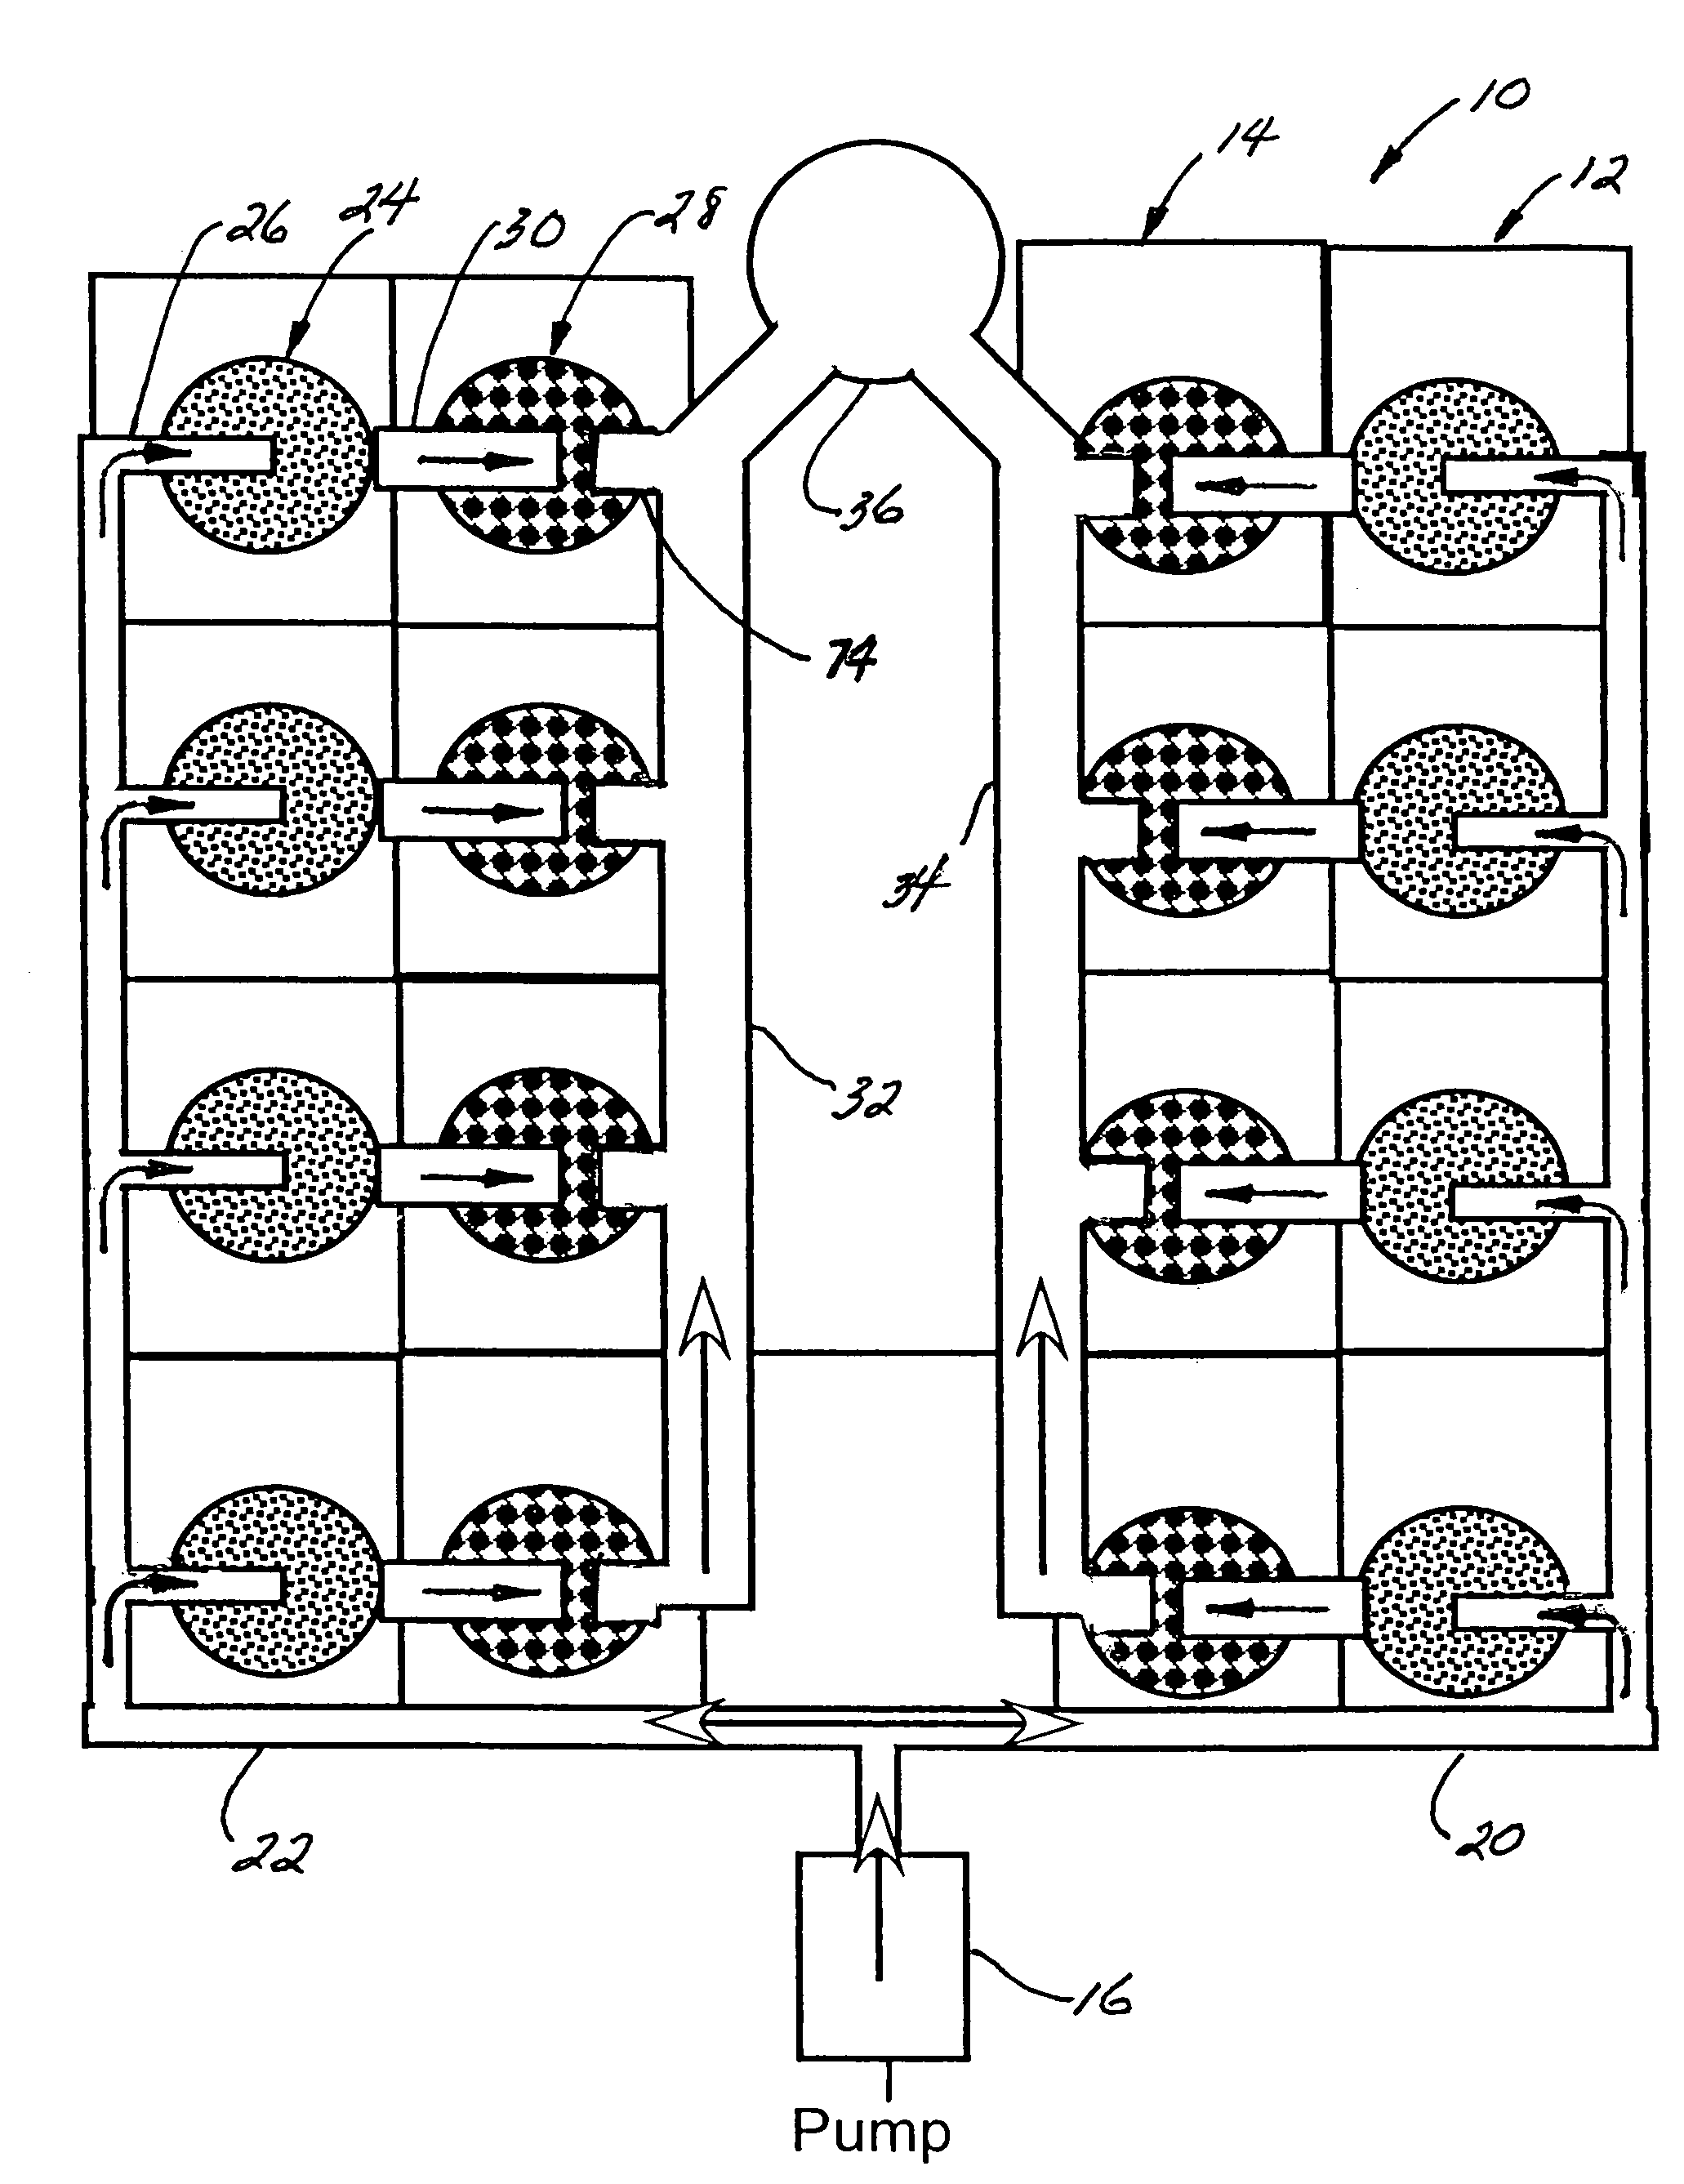 Dual cell nitrogen removal apparatus